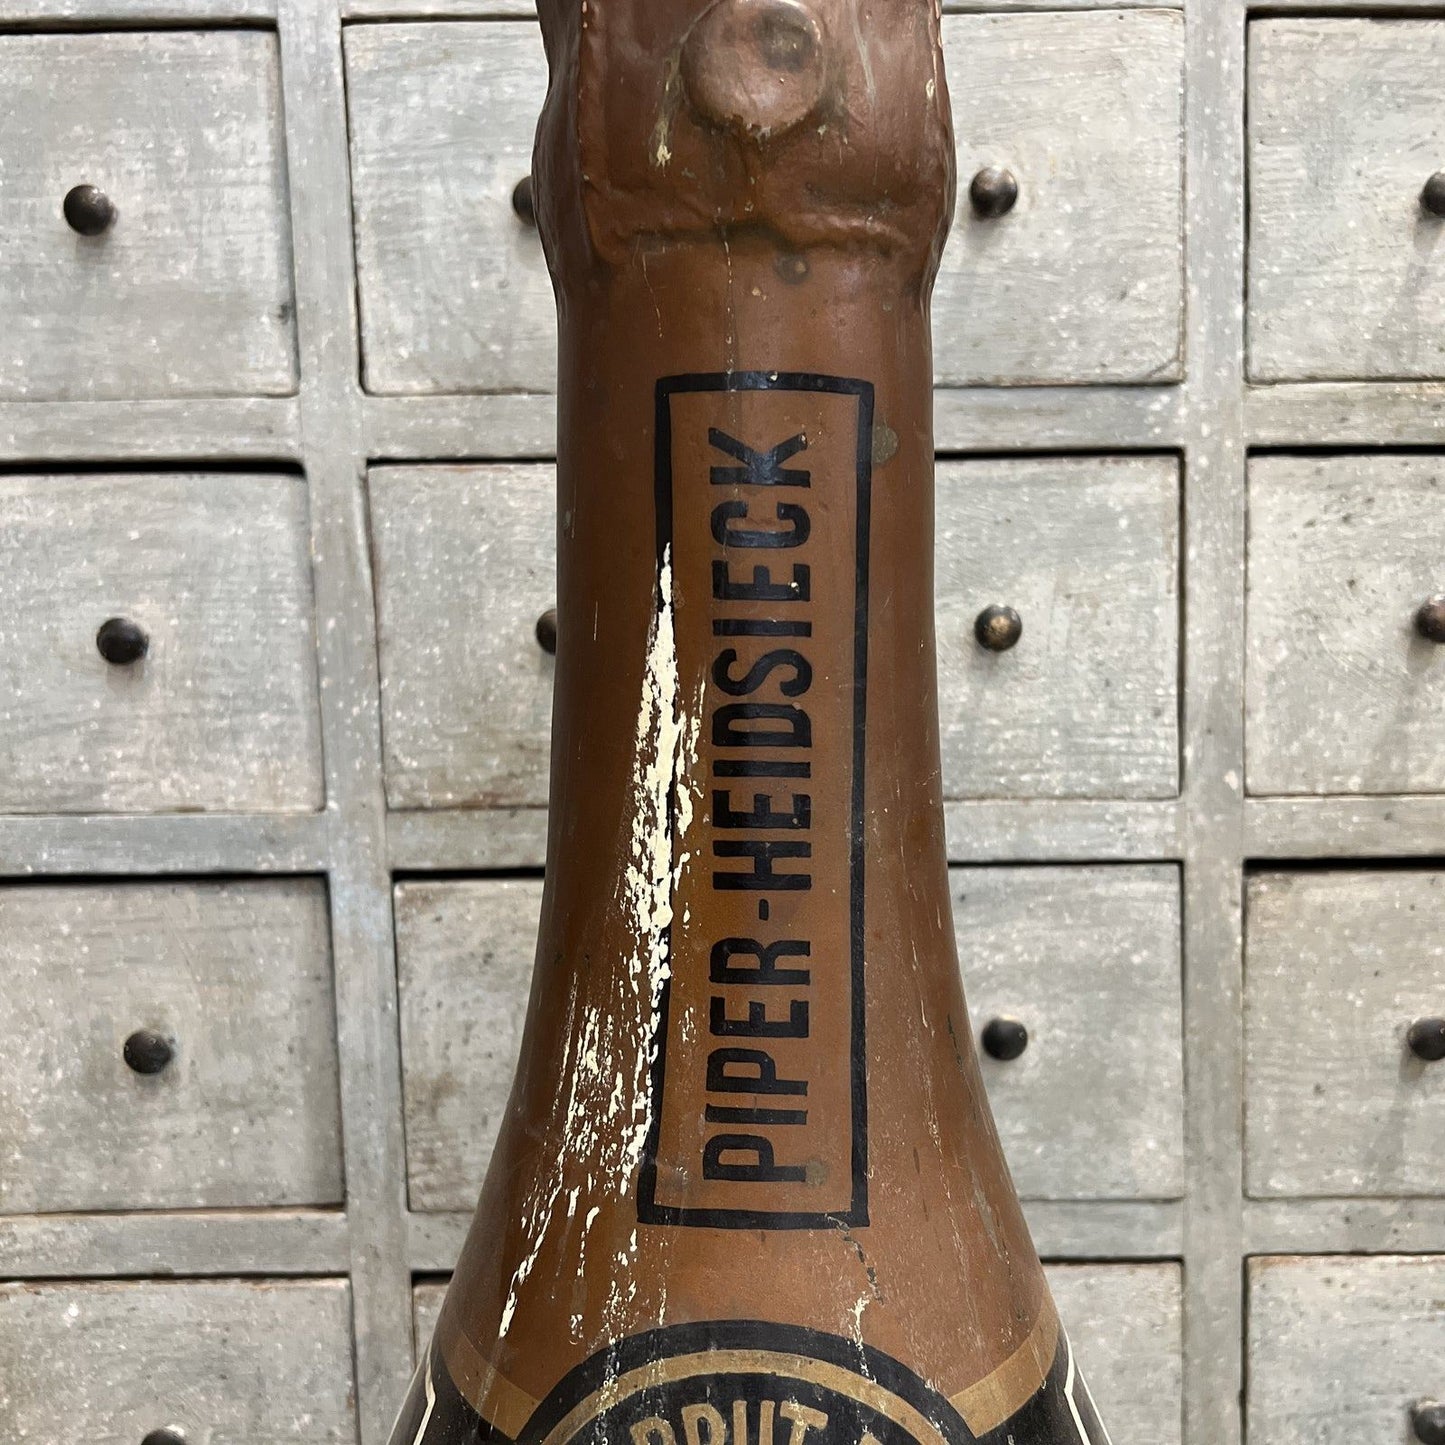 Mid-Century Modern Large Piper-Heidsieck Plastic Champagne Bottle - The White Barn Antiques